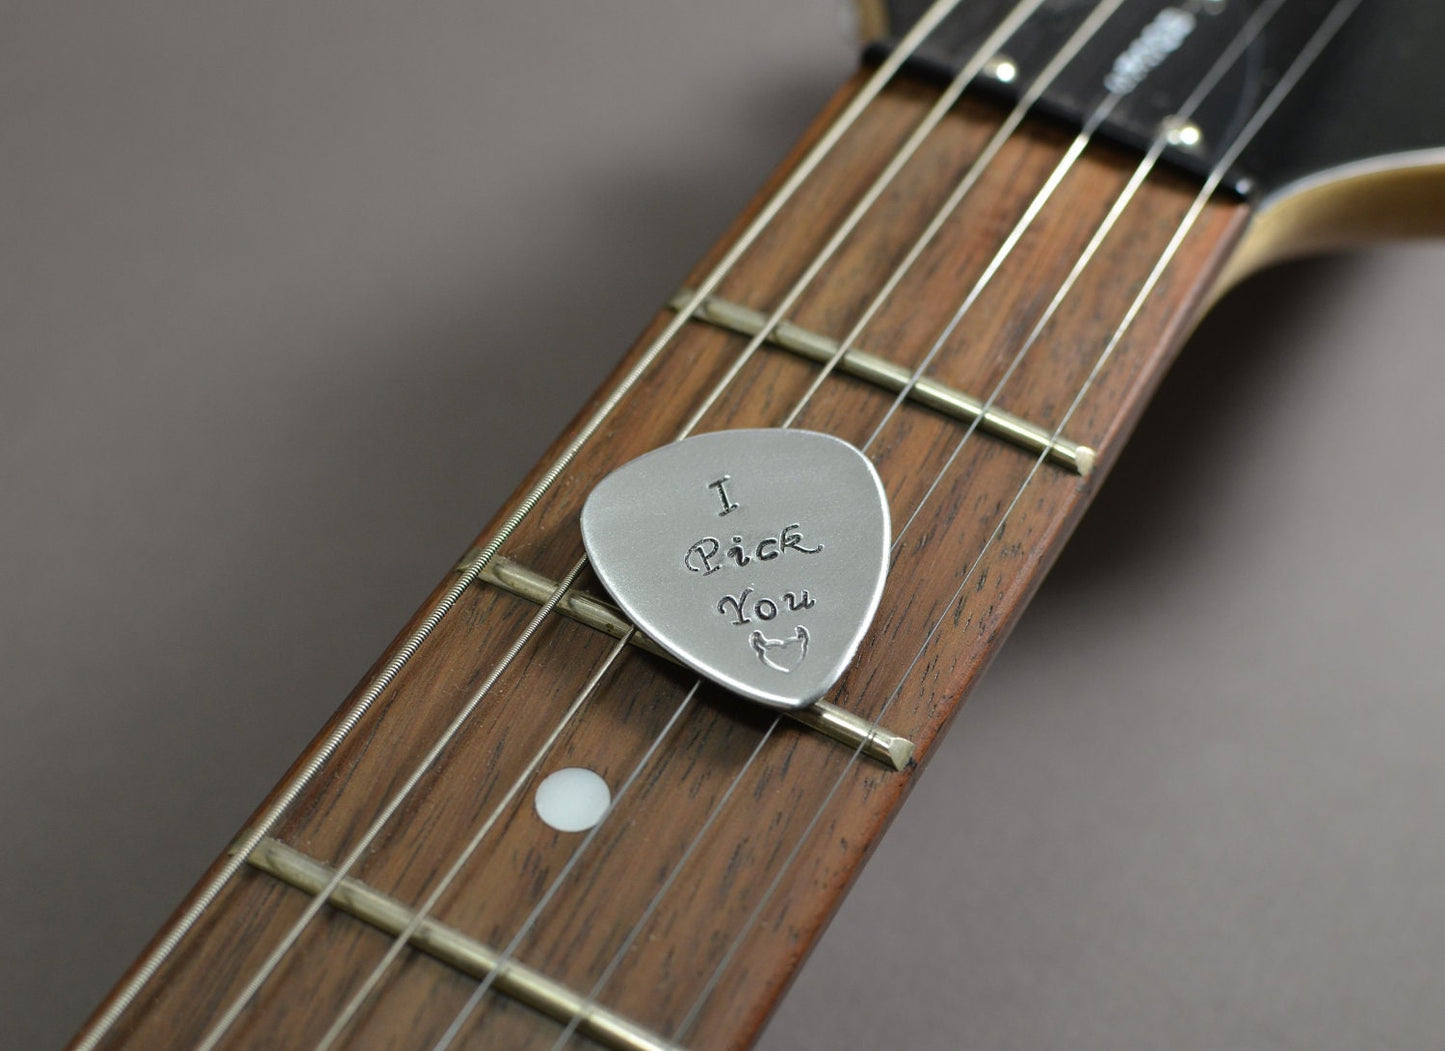 Medium sized guitar pick with I pick you in aluminum